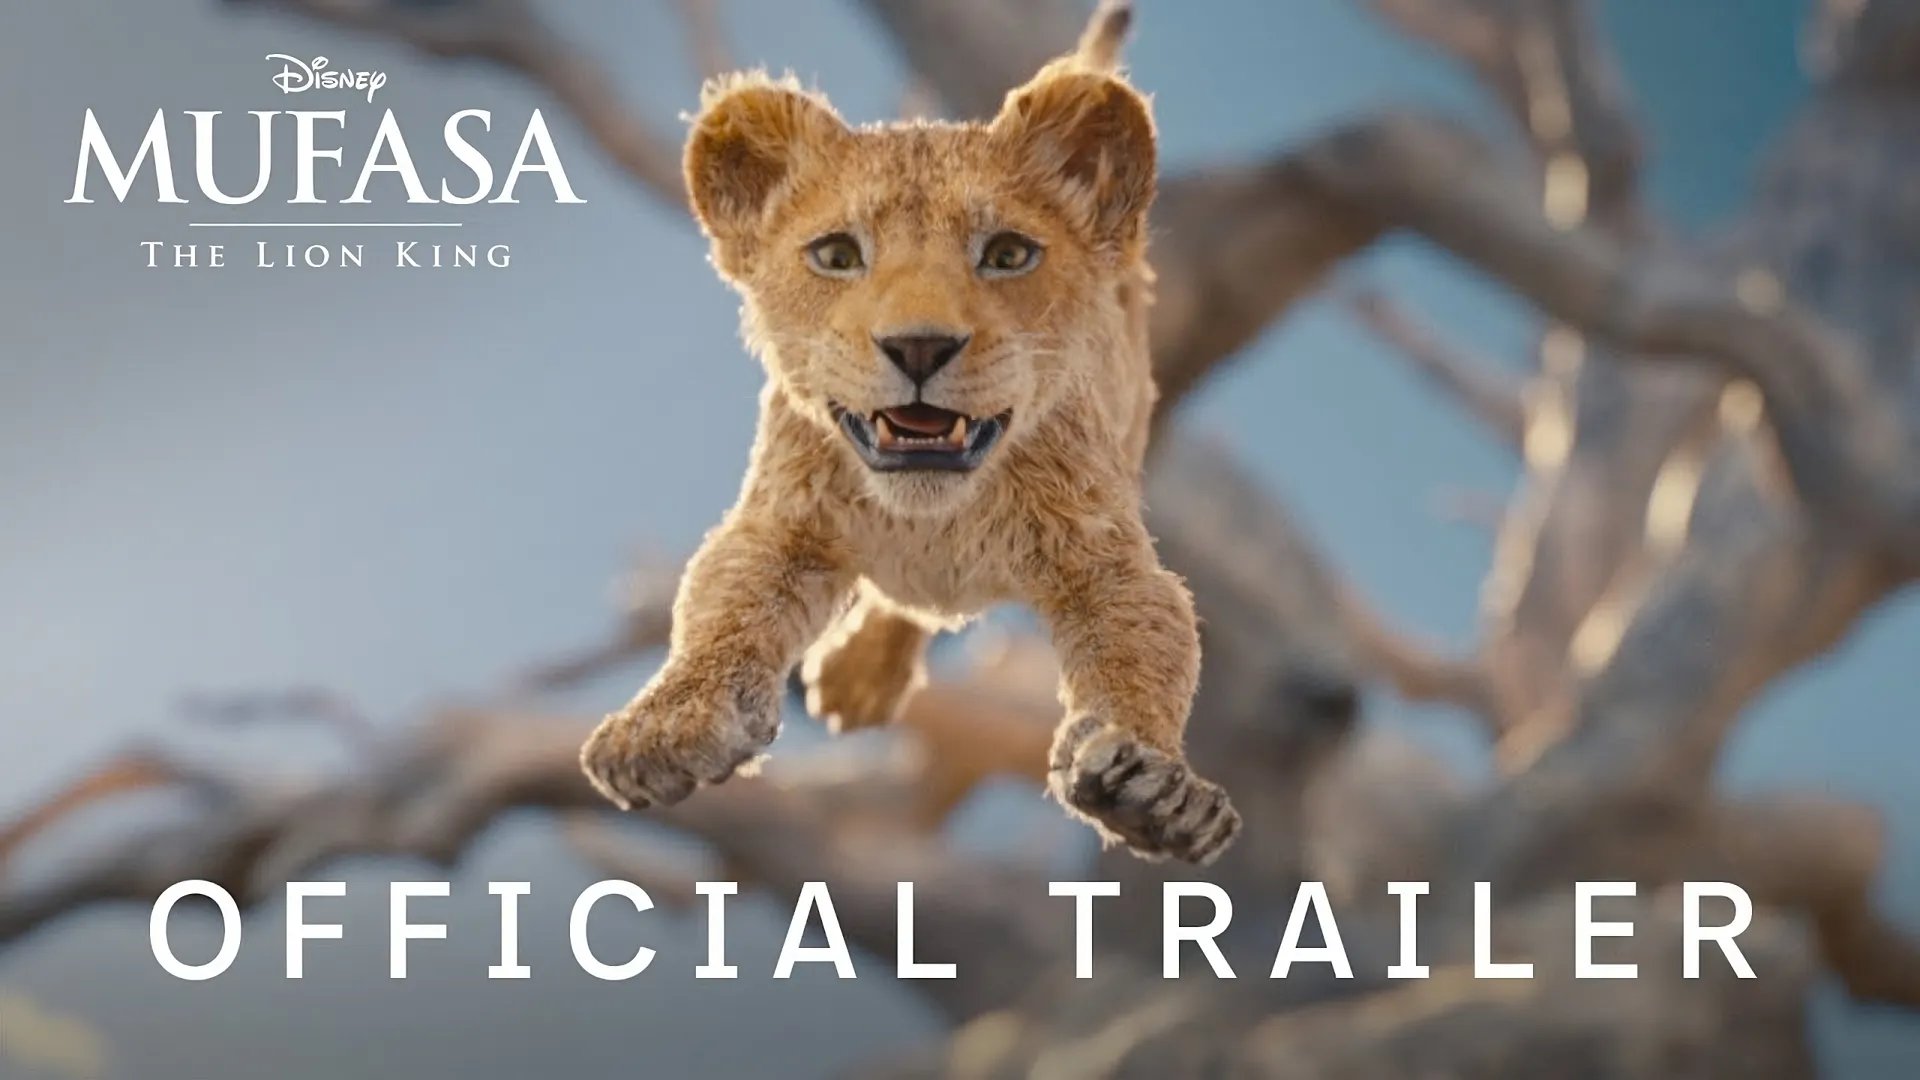 Trailer for Mufasa: The Lion King